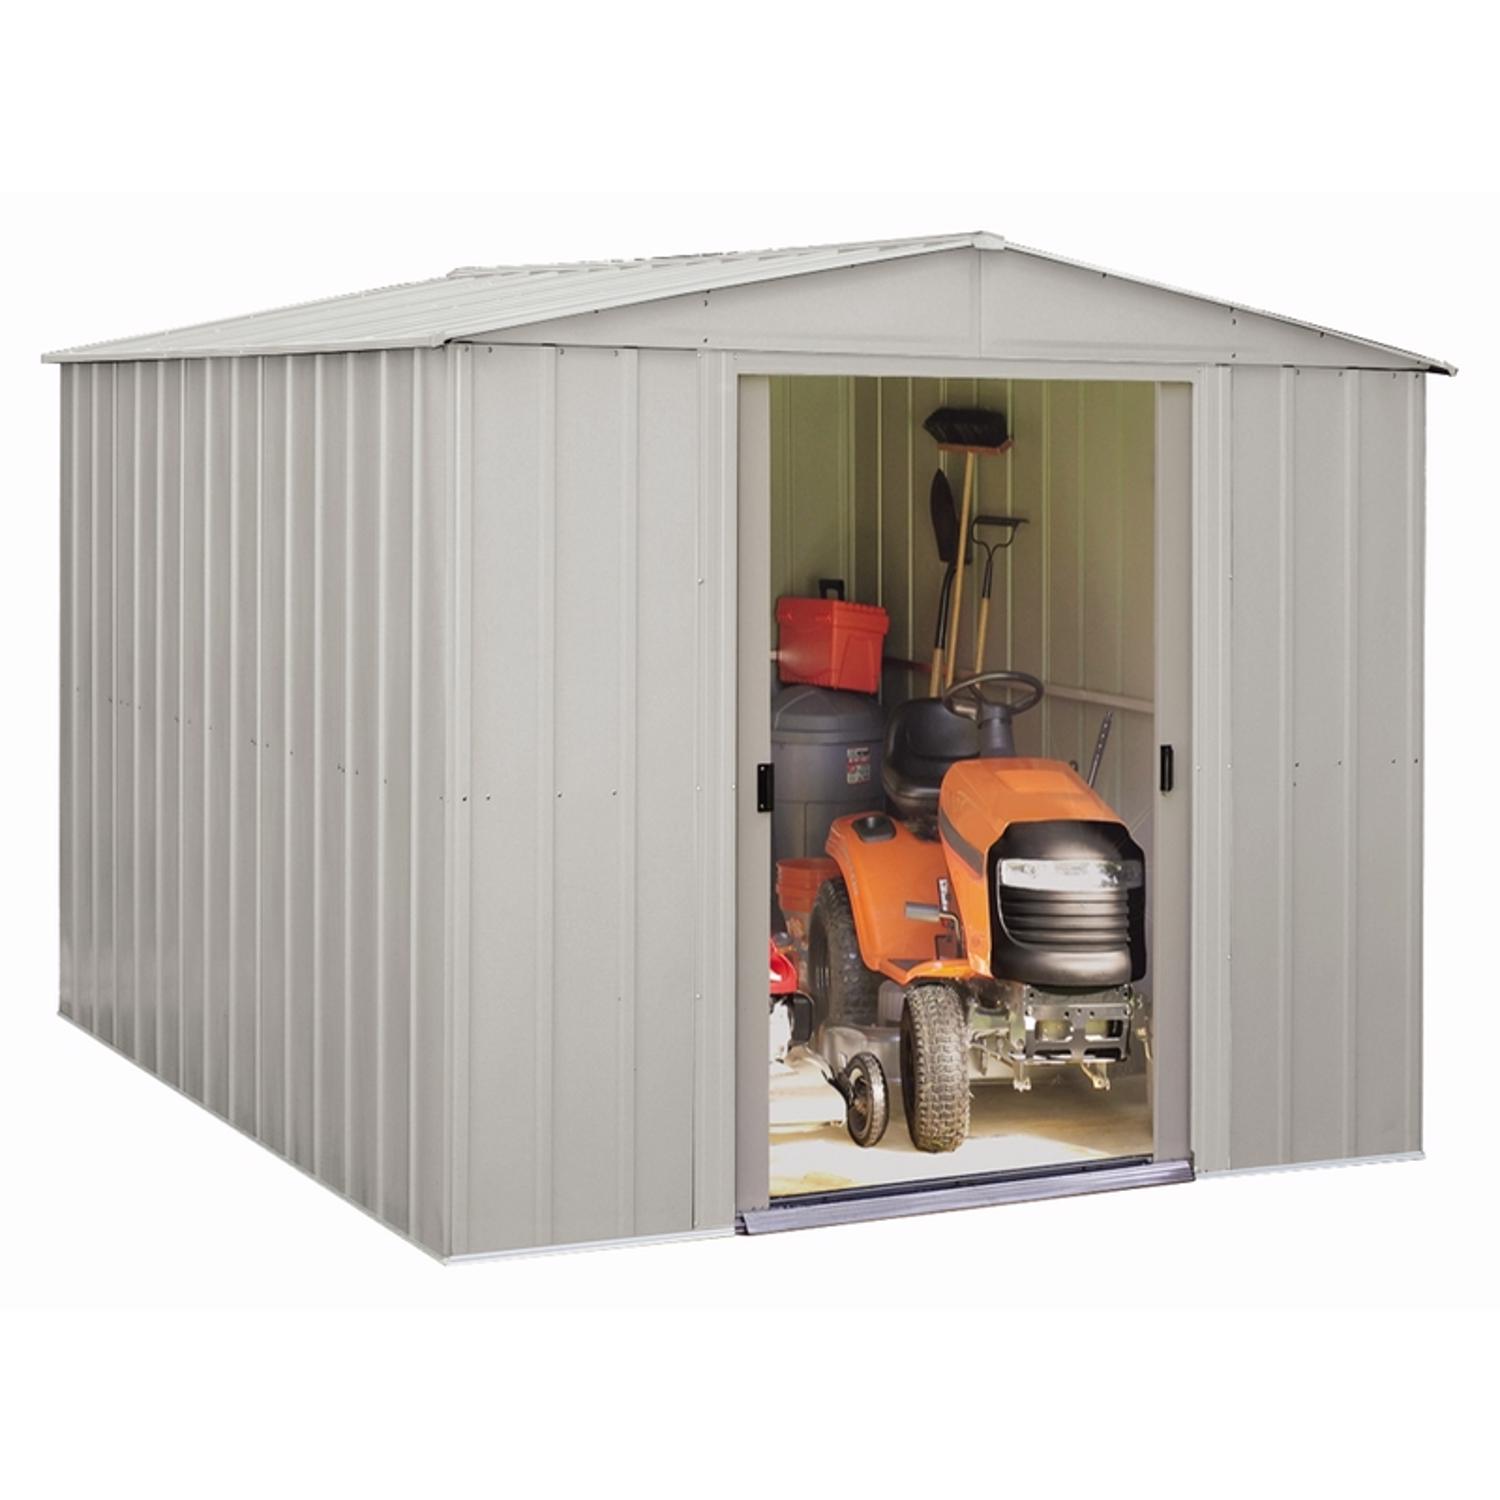 Arrow 10 ft. x 10 ft. Metal Vertical Peak Storage Shed without Floor Kit -  ACE1010FG